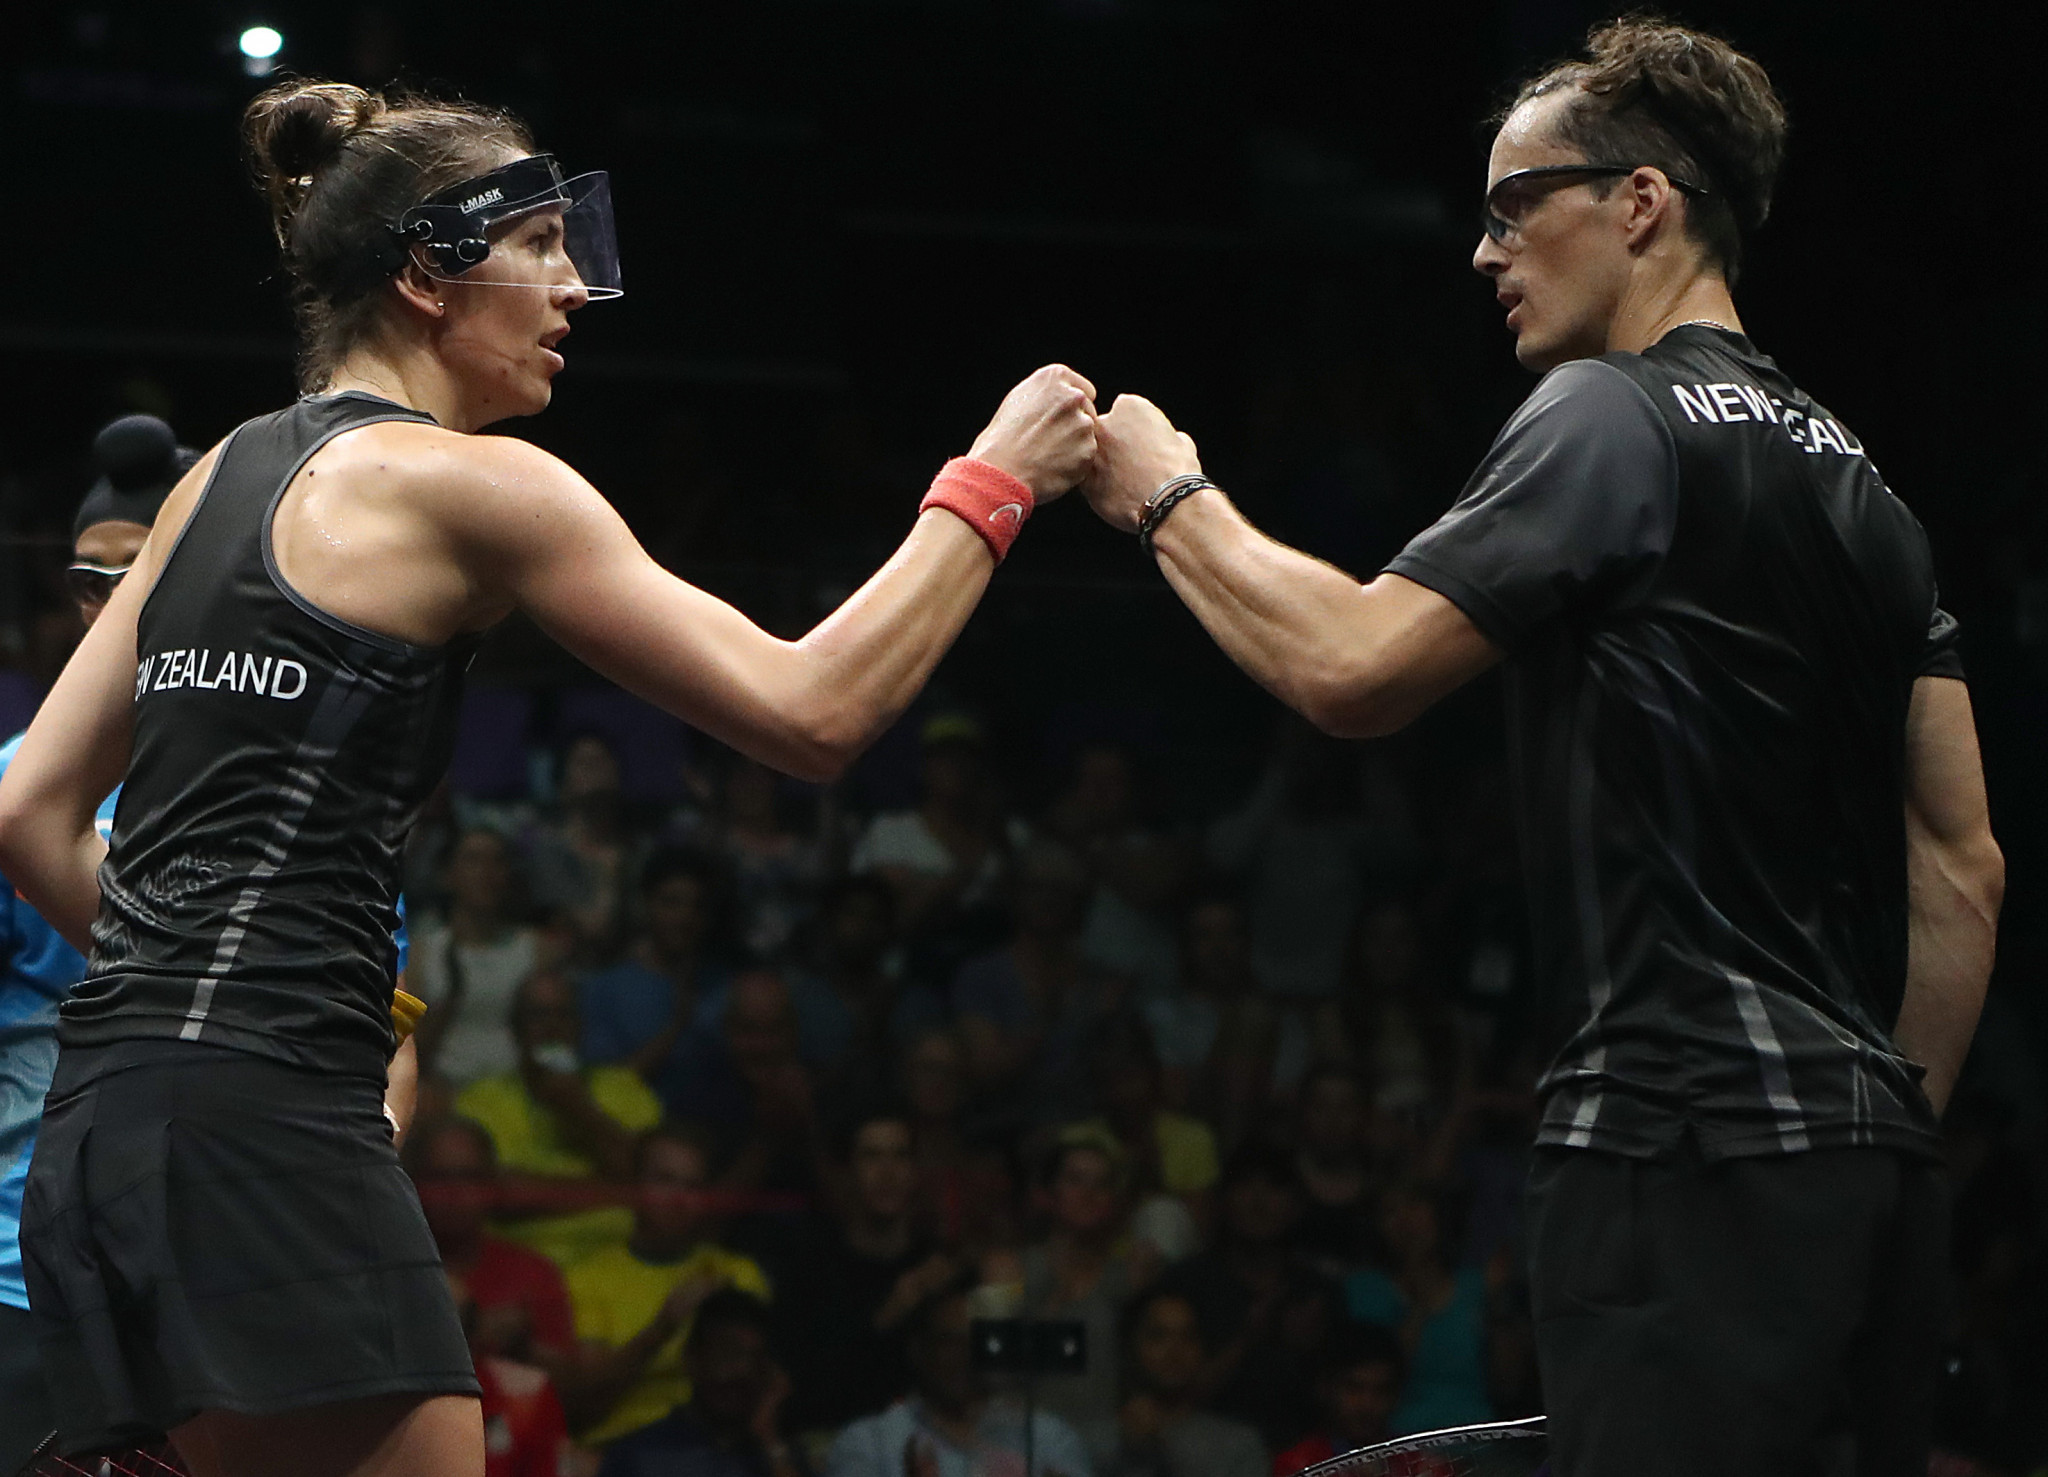 Joelle King, left, and Paul Coll, right, headline New Zealand's squash team again ©Getty Images